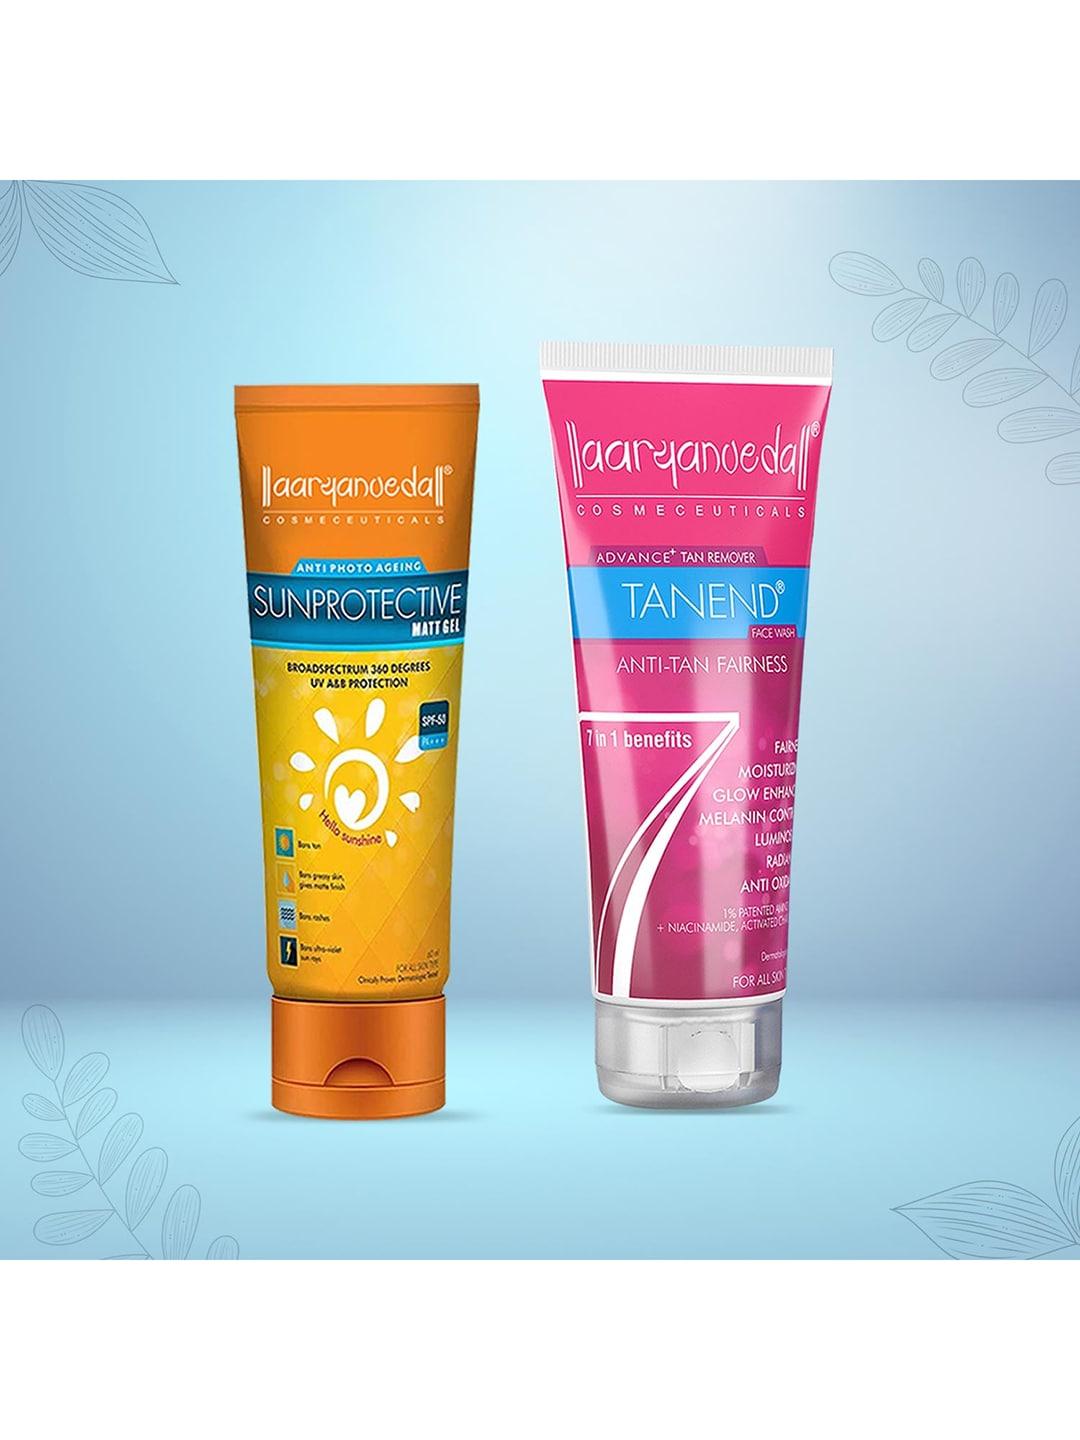 Aryanveda Sunscreen Spf 50 PA+++ With Tanend Face Wash For Fairness & Tan Removal 120g each